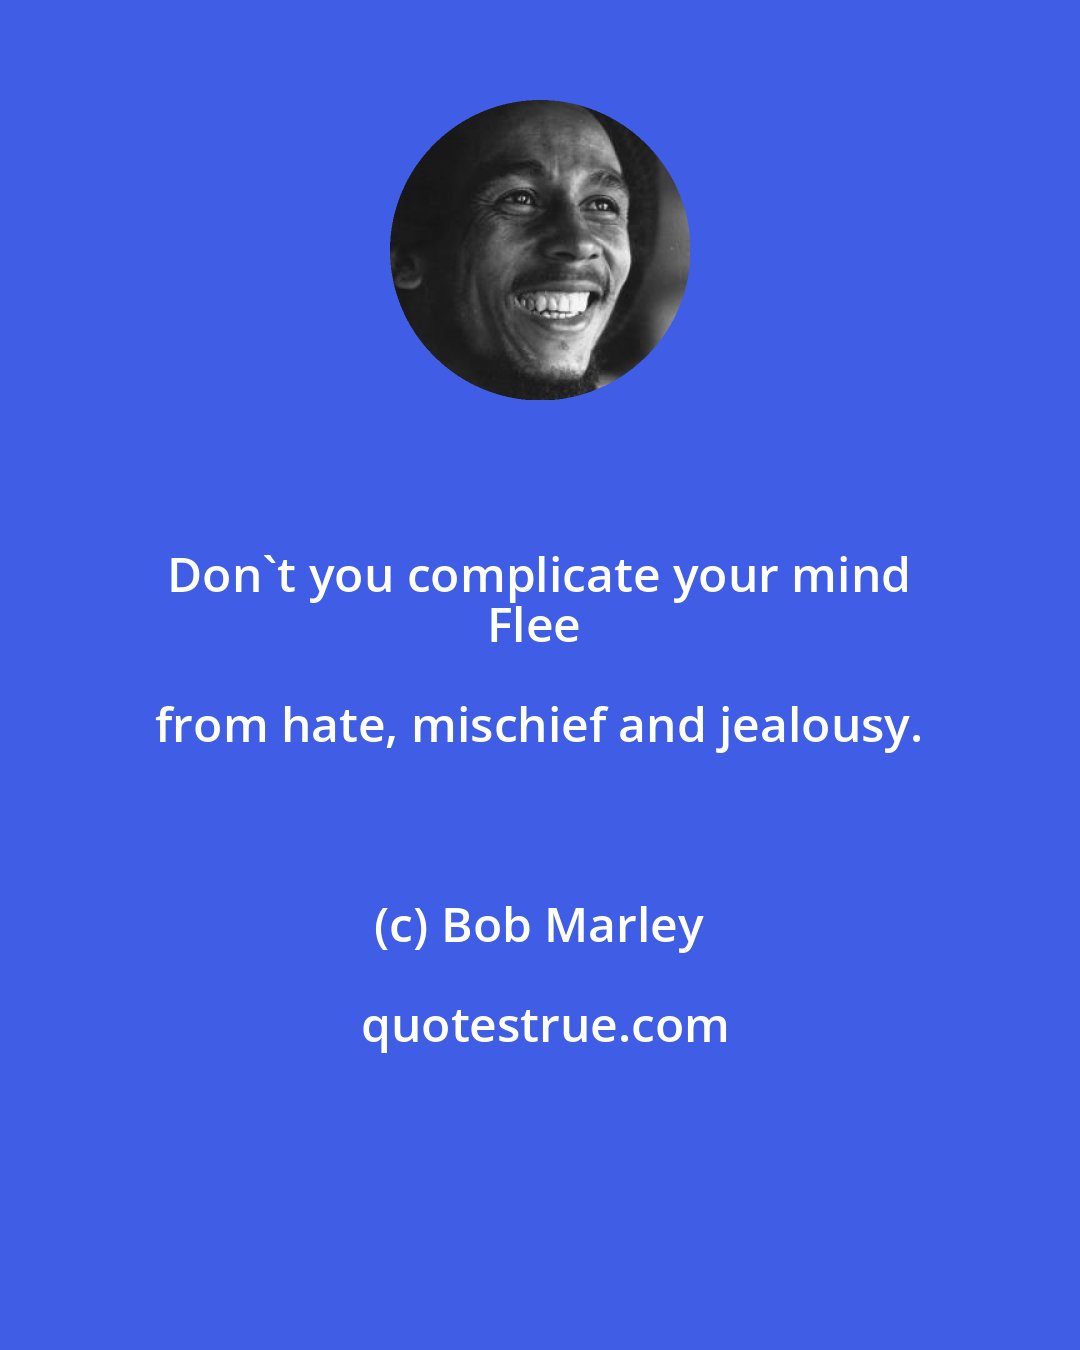 Bob Marley: Don't you complicate your mind 
Flee from hate, mischief and jealousy.